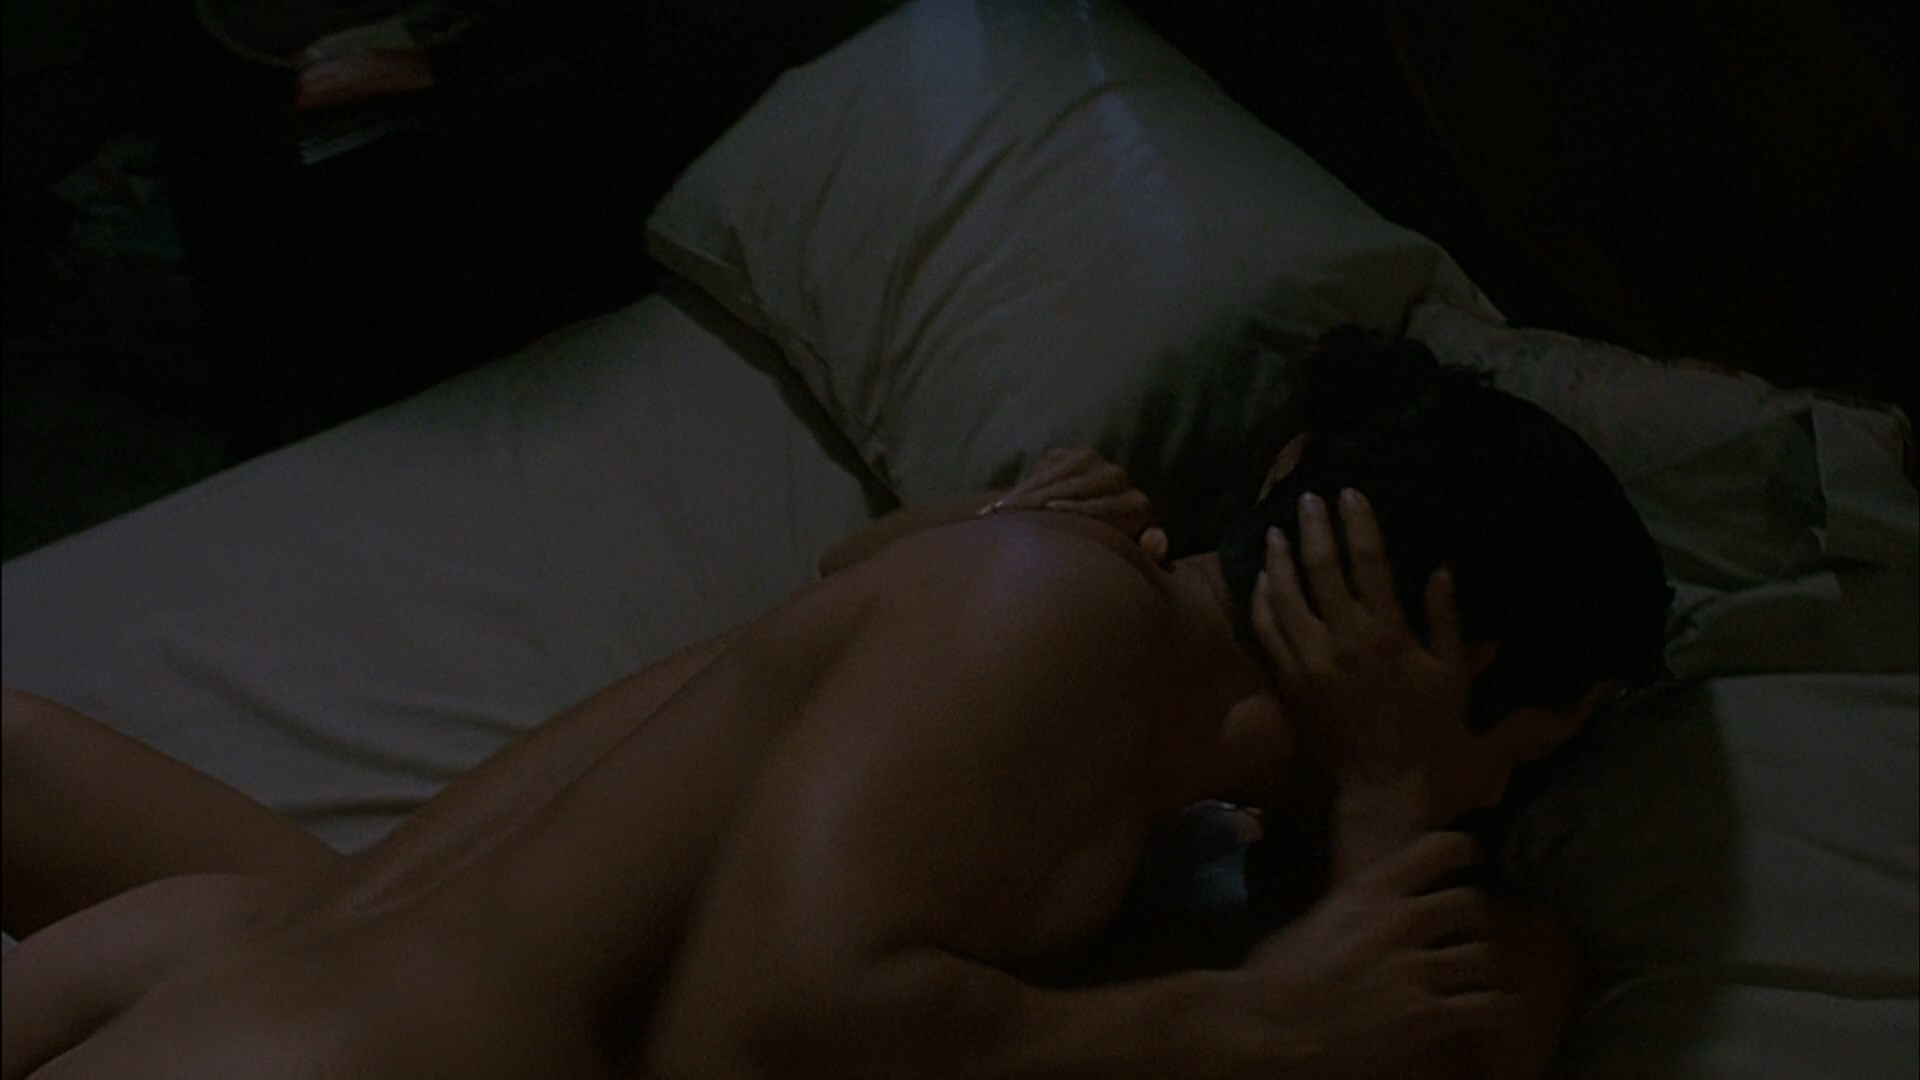 Jennifer Beals is having sex with some guy. 